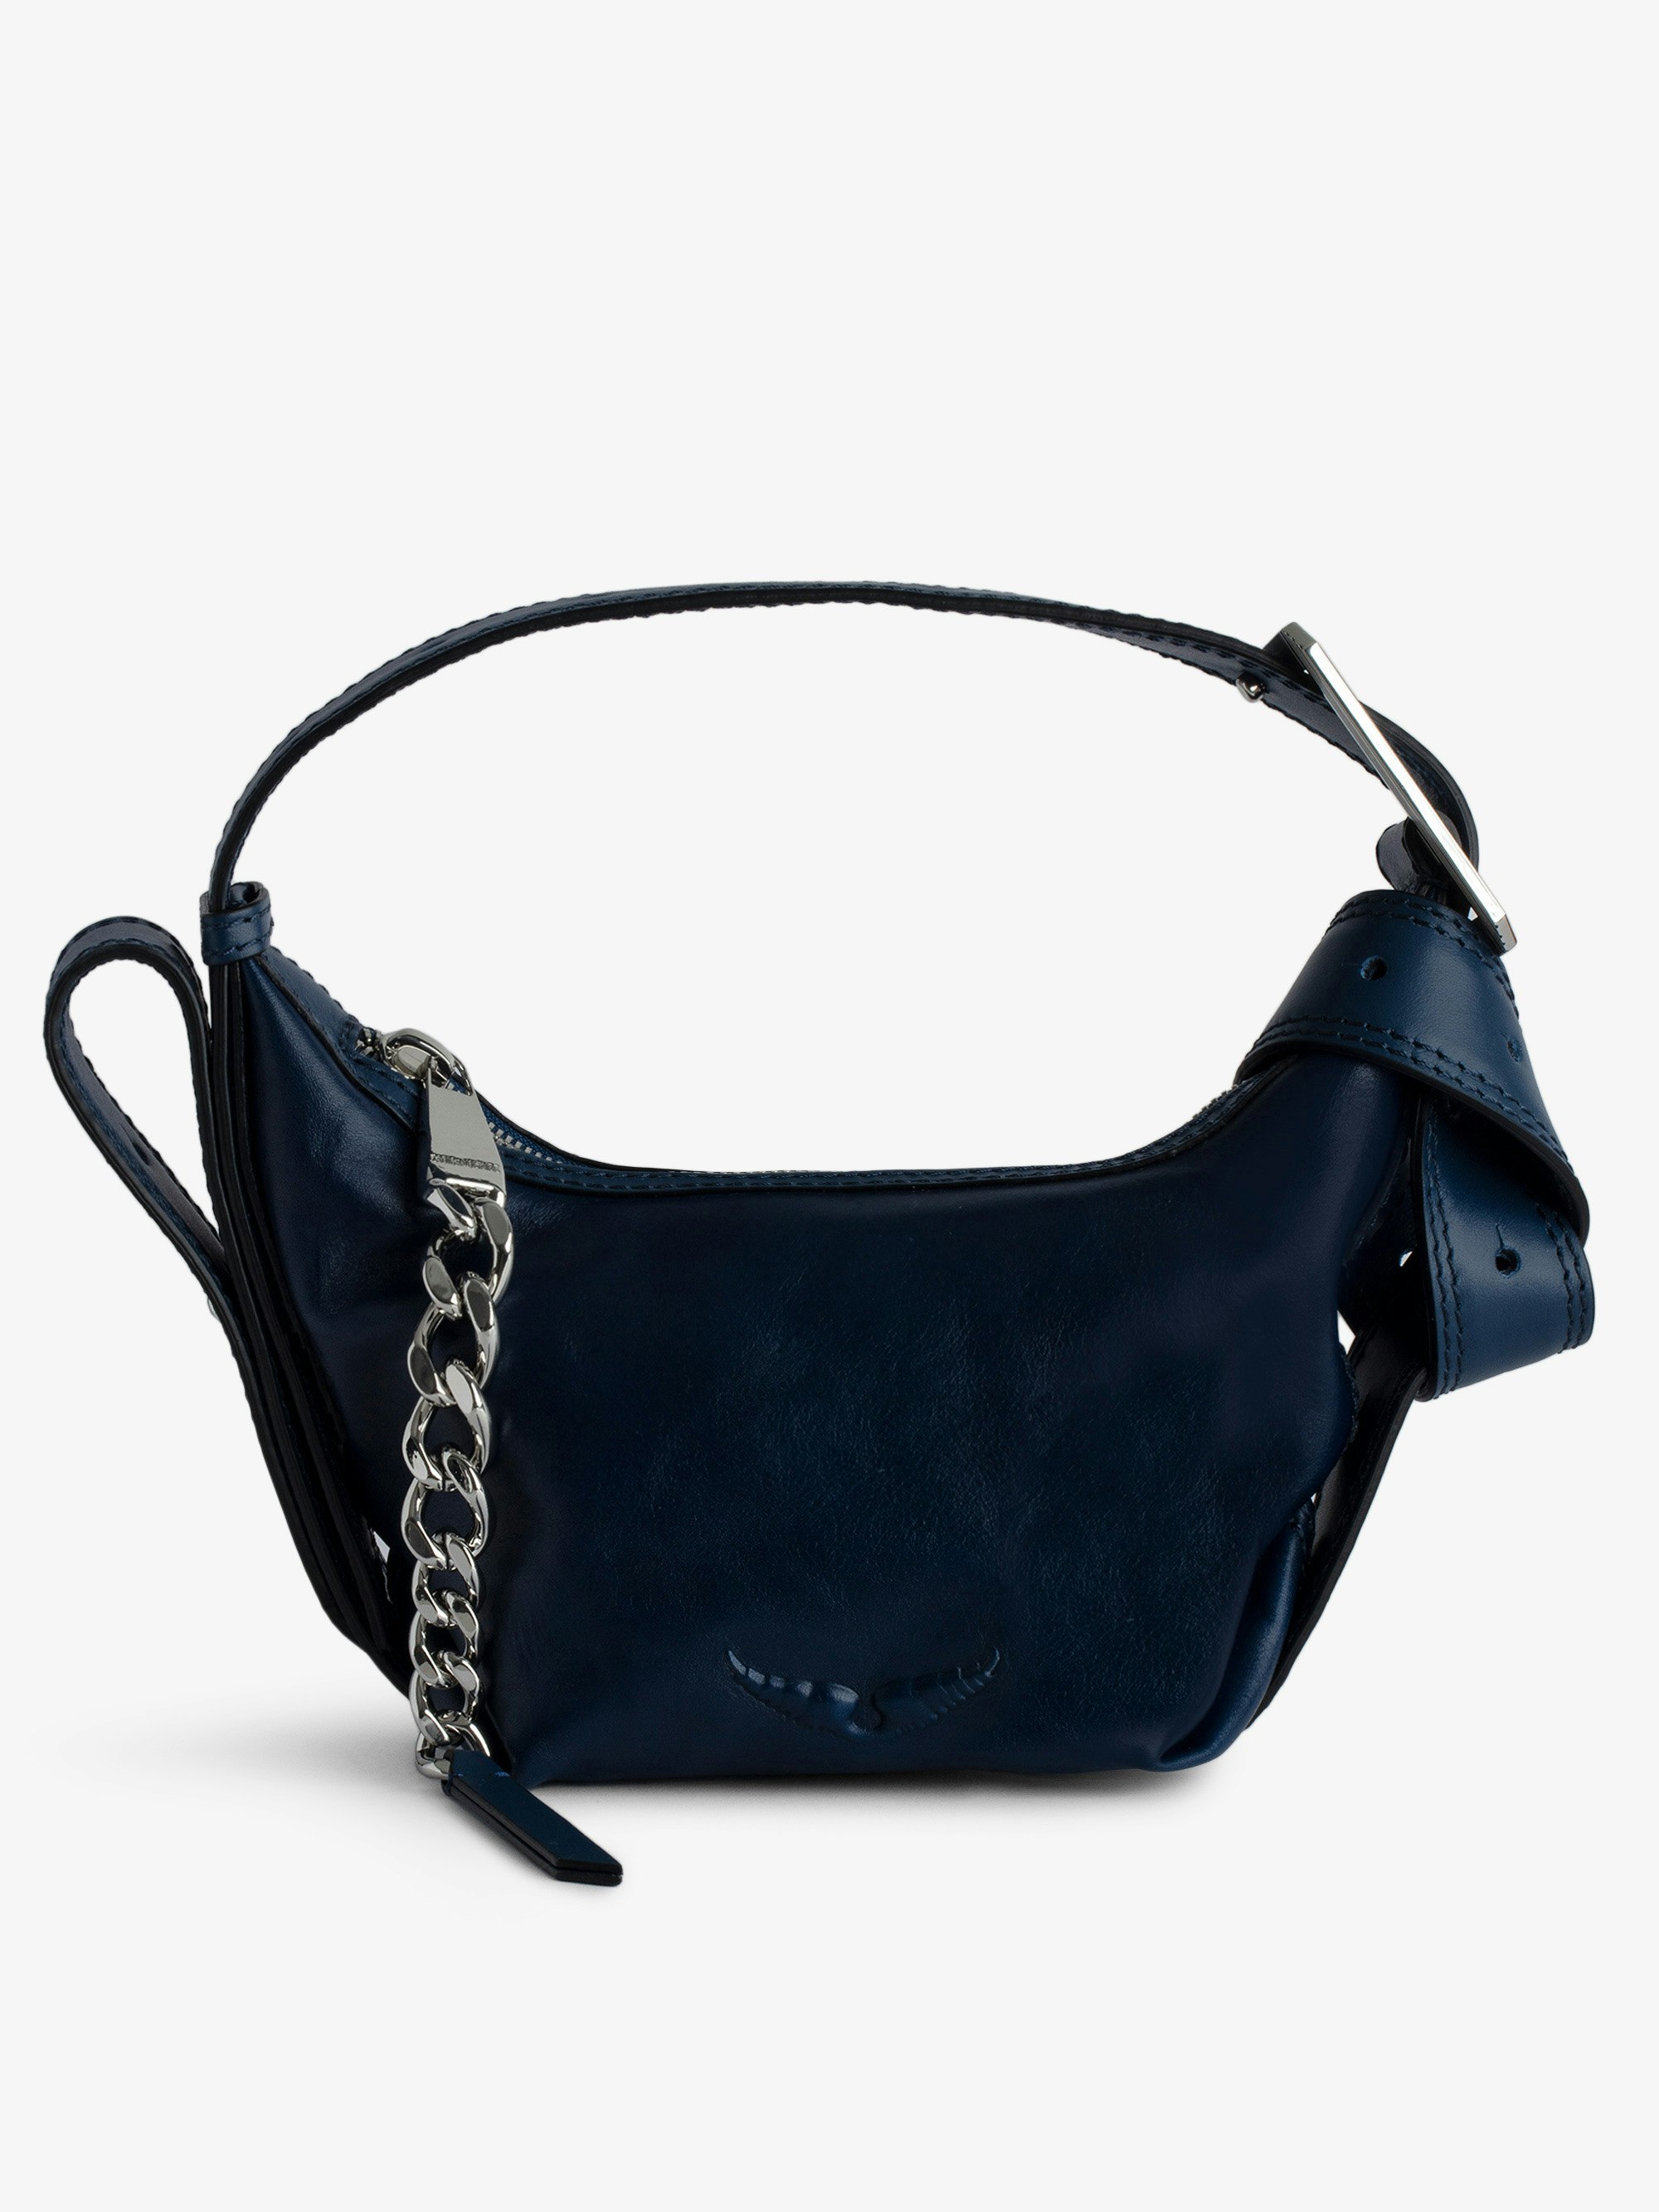 Le Cecilia XS Bag - Women’s small blue smooth leather bag with shoulder strap and metal C buckle.